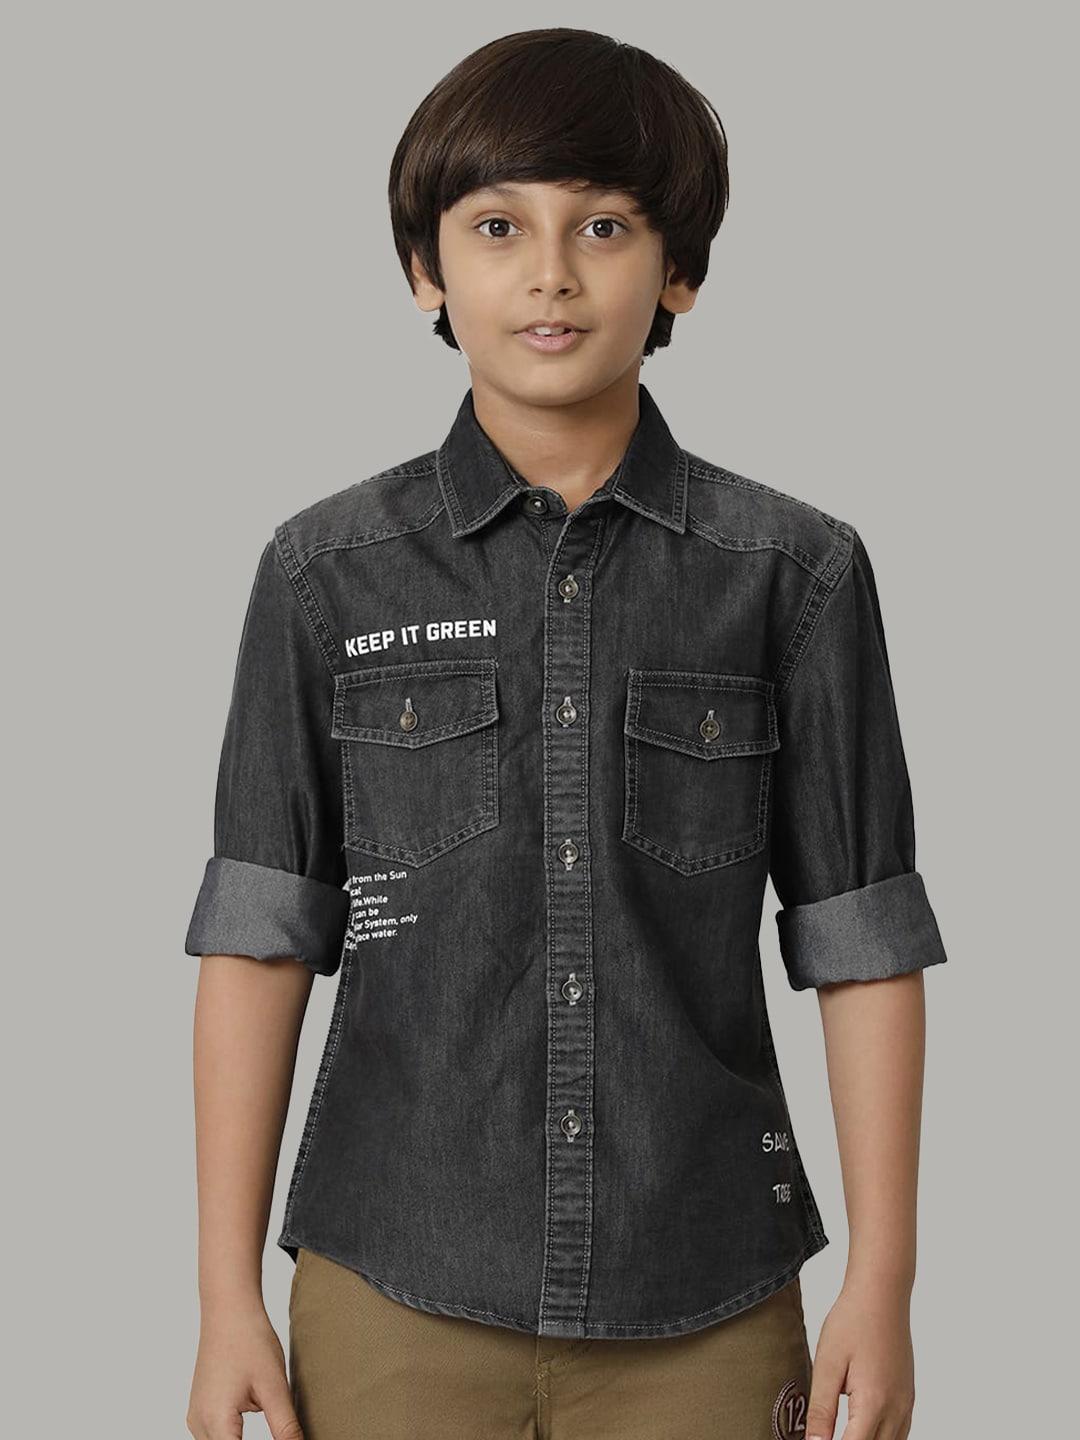 under fourteen only boys typography printed cotton casual shirt